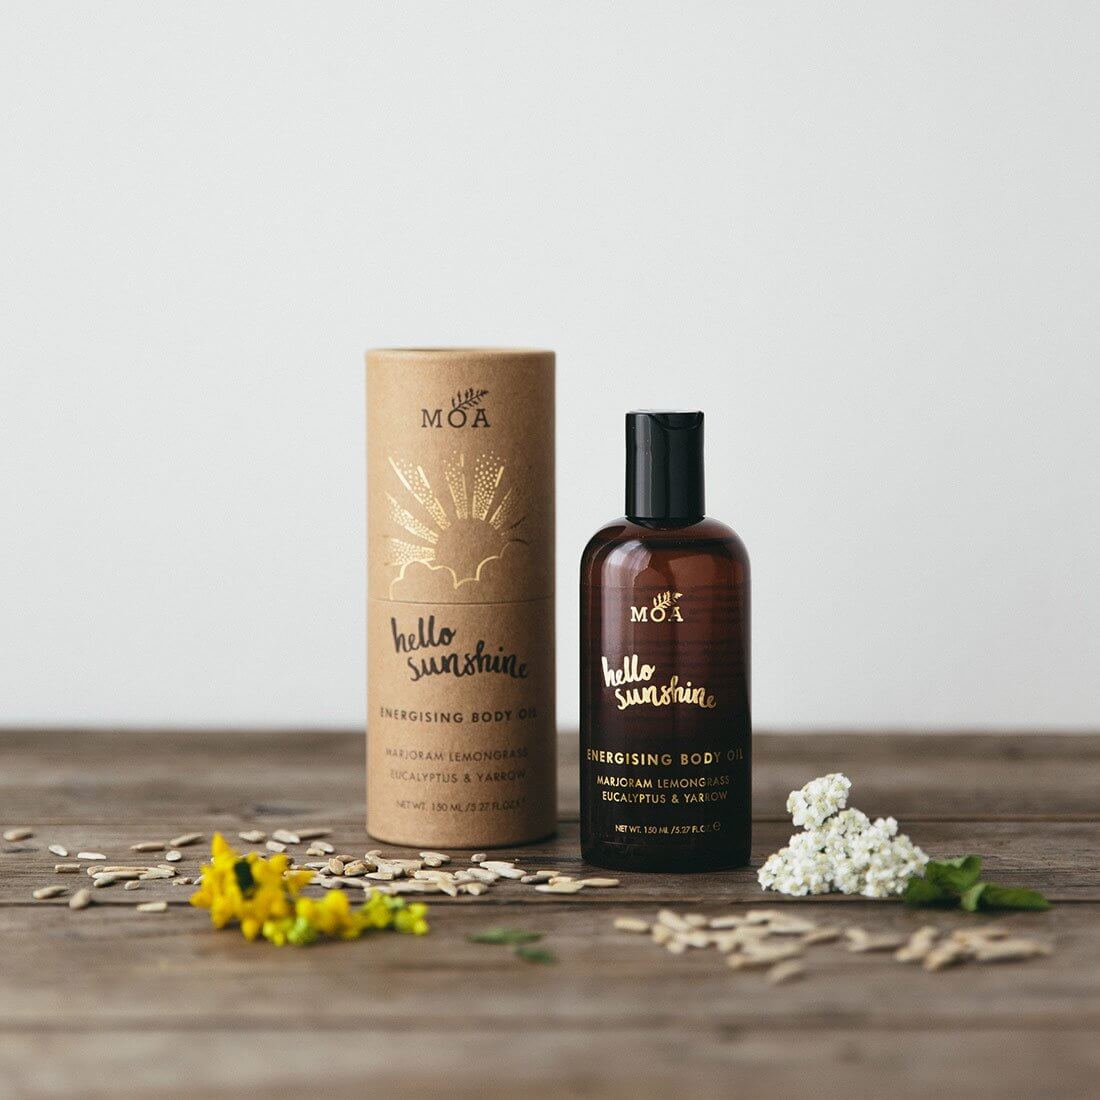 Natural-themed body oil packaging with a cardboard paper tube and a brown glass bottle, both printed with logo and displayed among scattered flower petals, conveying an organic and wholesome aesthetic.